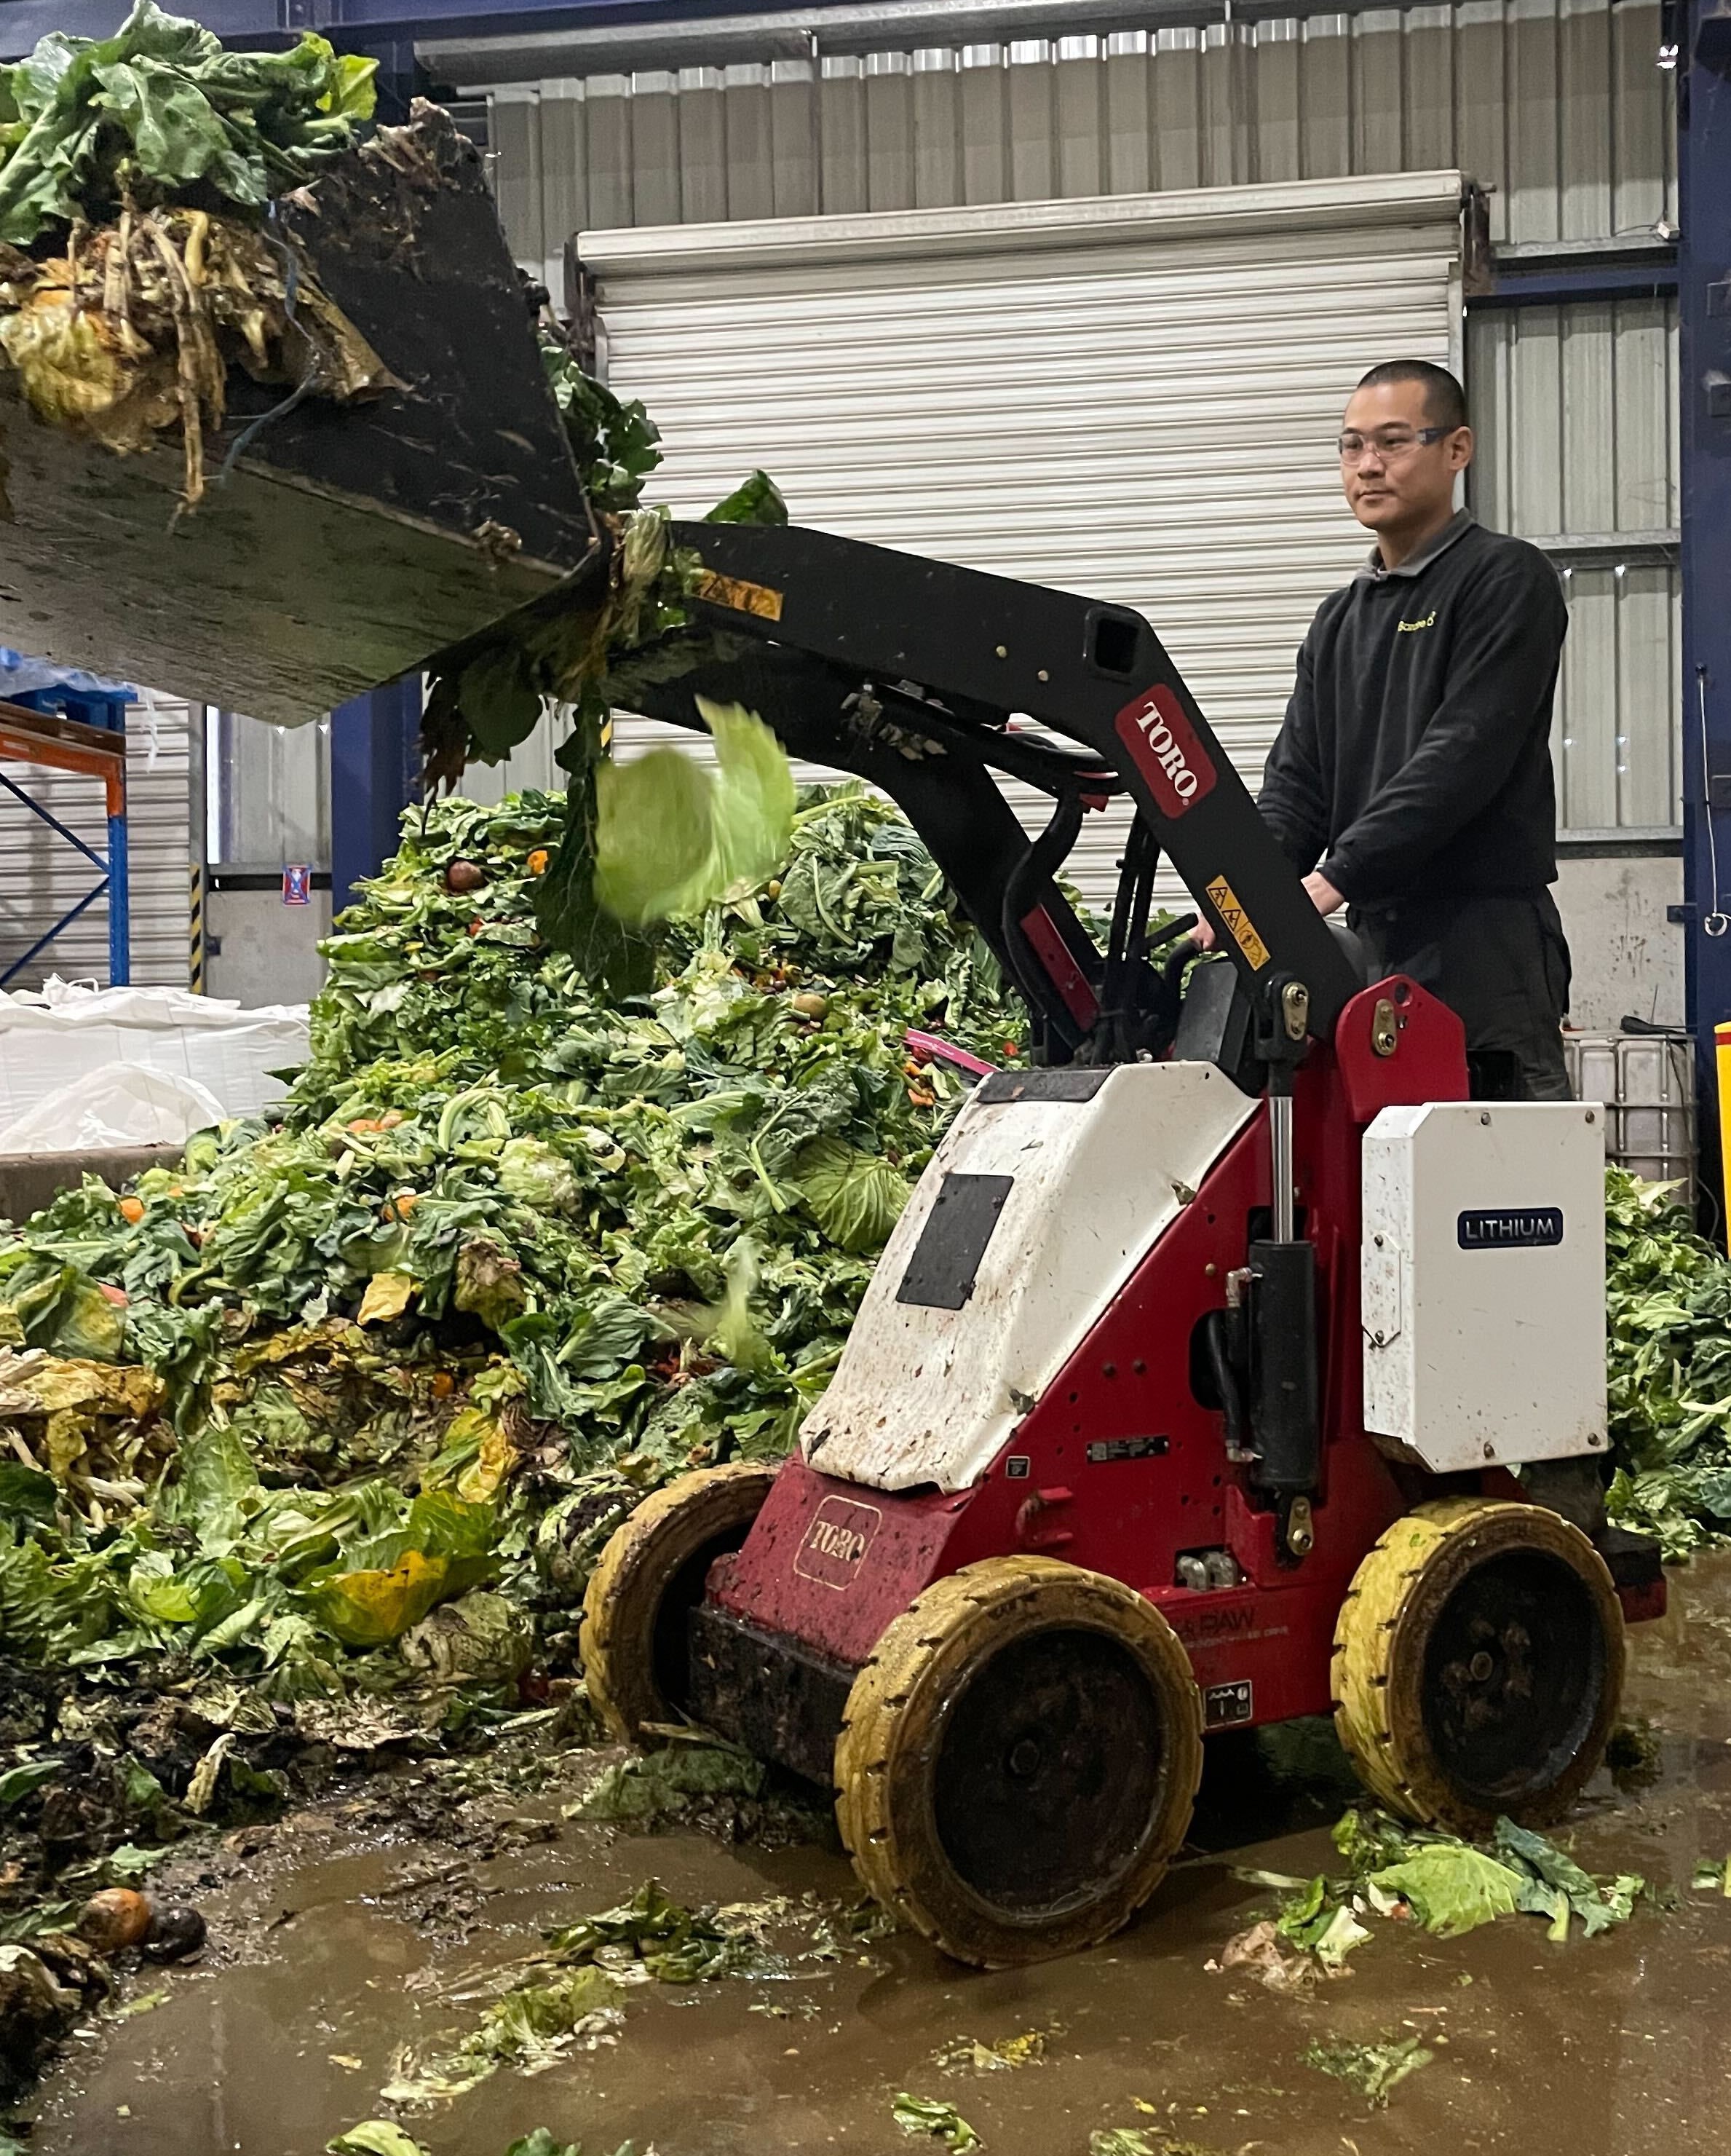 WE500 electric compact utility loader helping make agriculture more sustainable